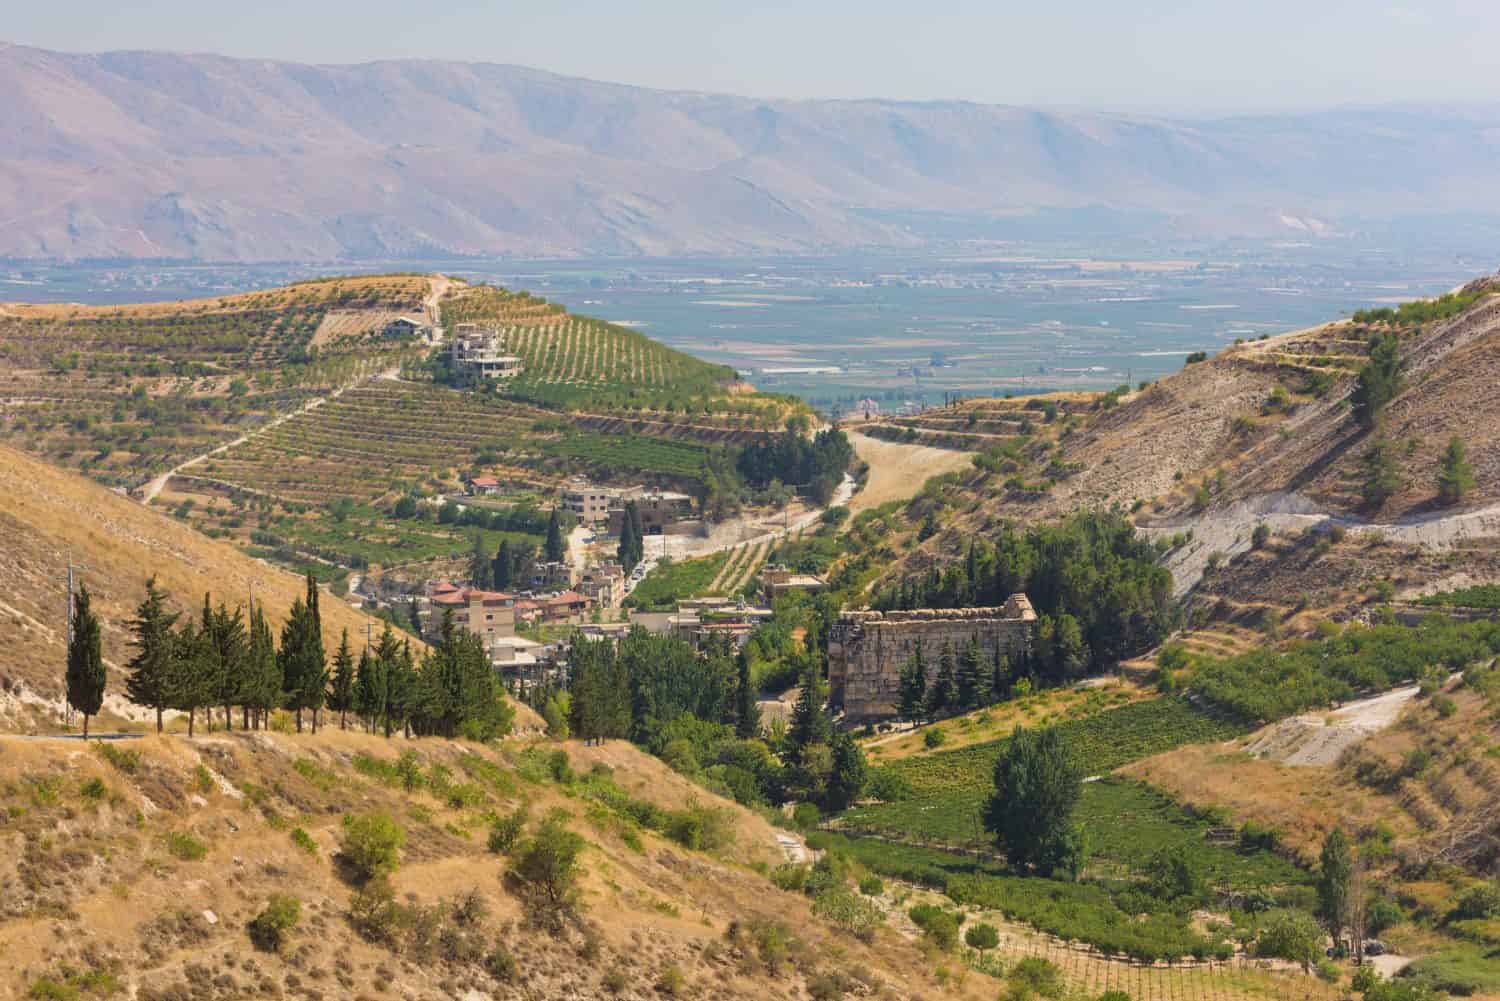 Panorama of the Bekaa Valley landscape with the Niha Roman temple, vineyard hills and mountains, in Zahle, Lebanon